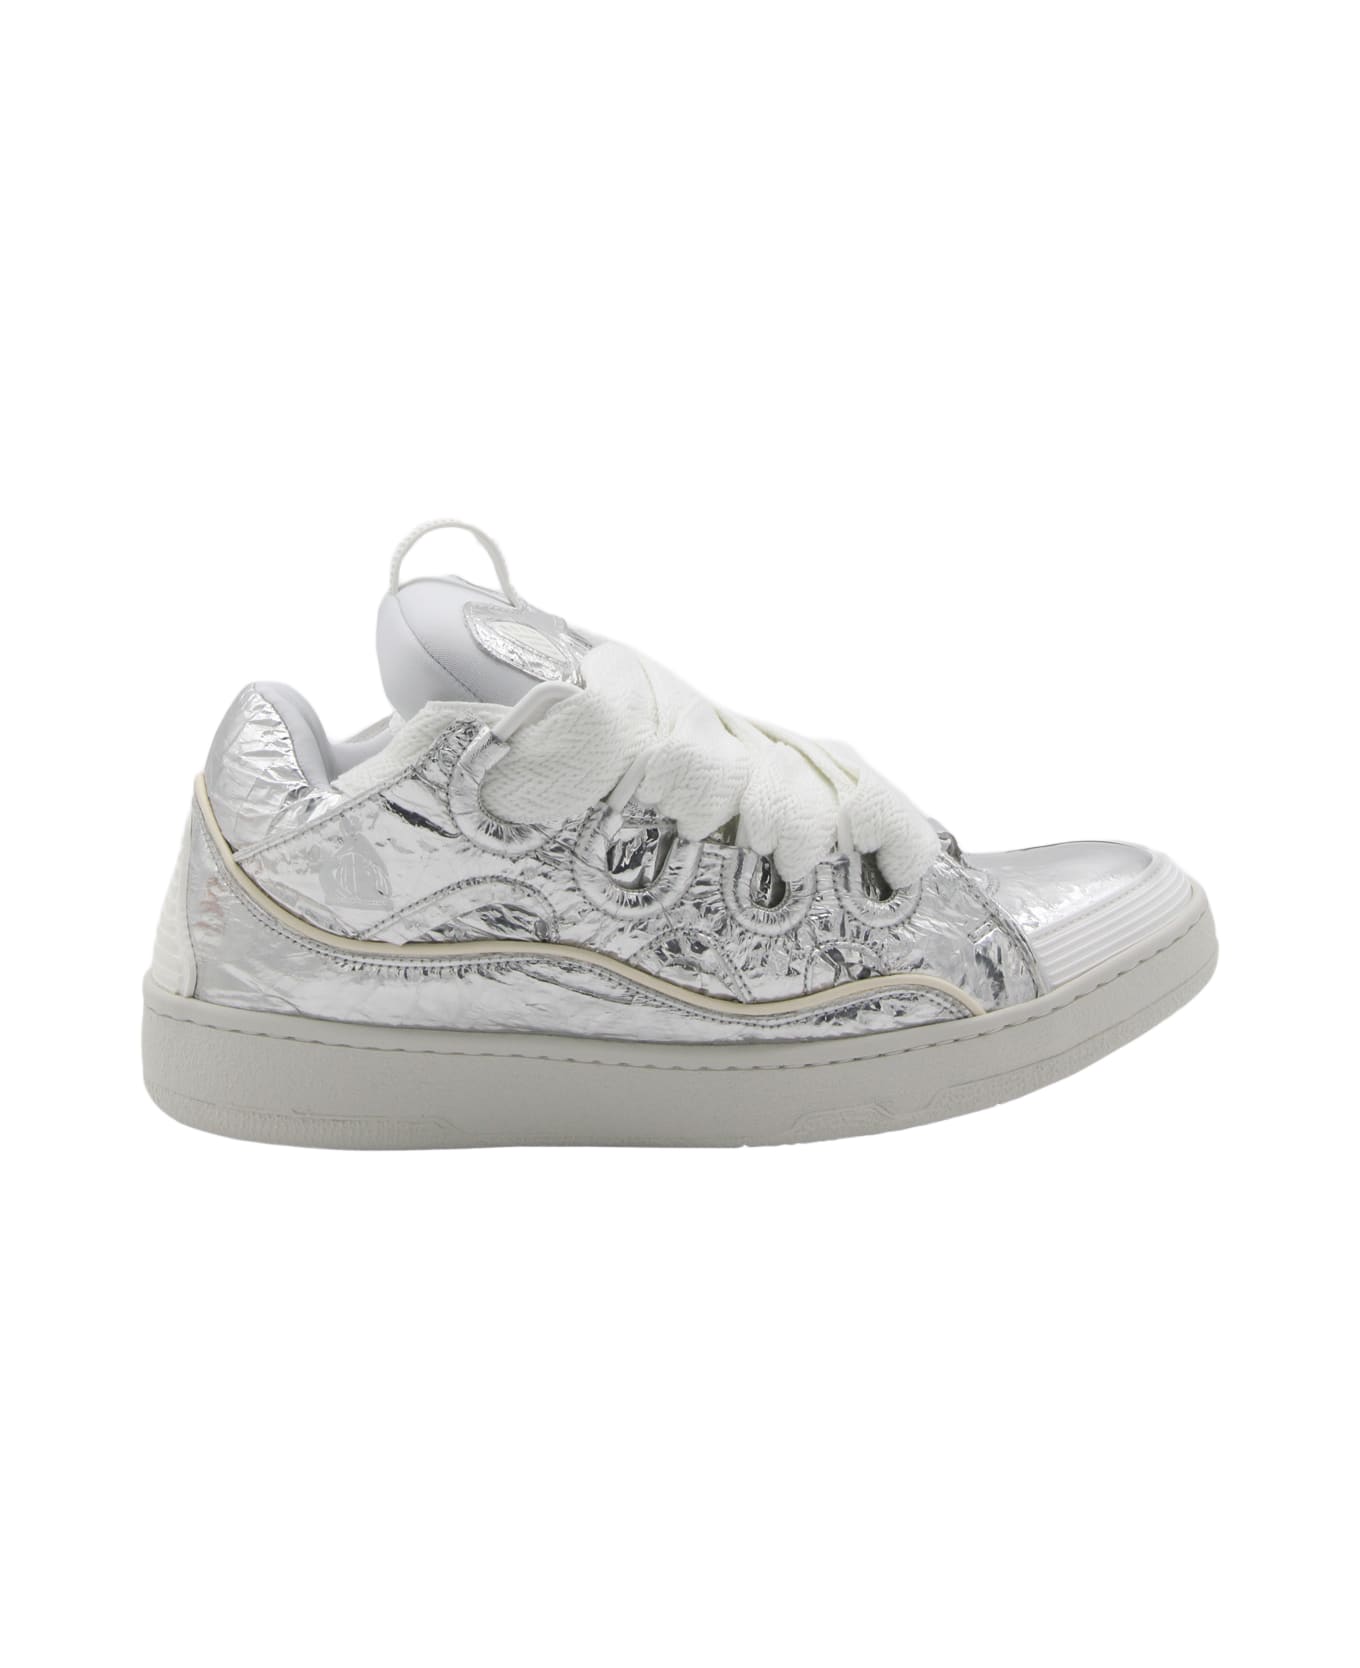 Lanvin Silver Leather Curb Sneakers - Silver